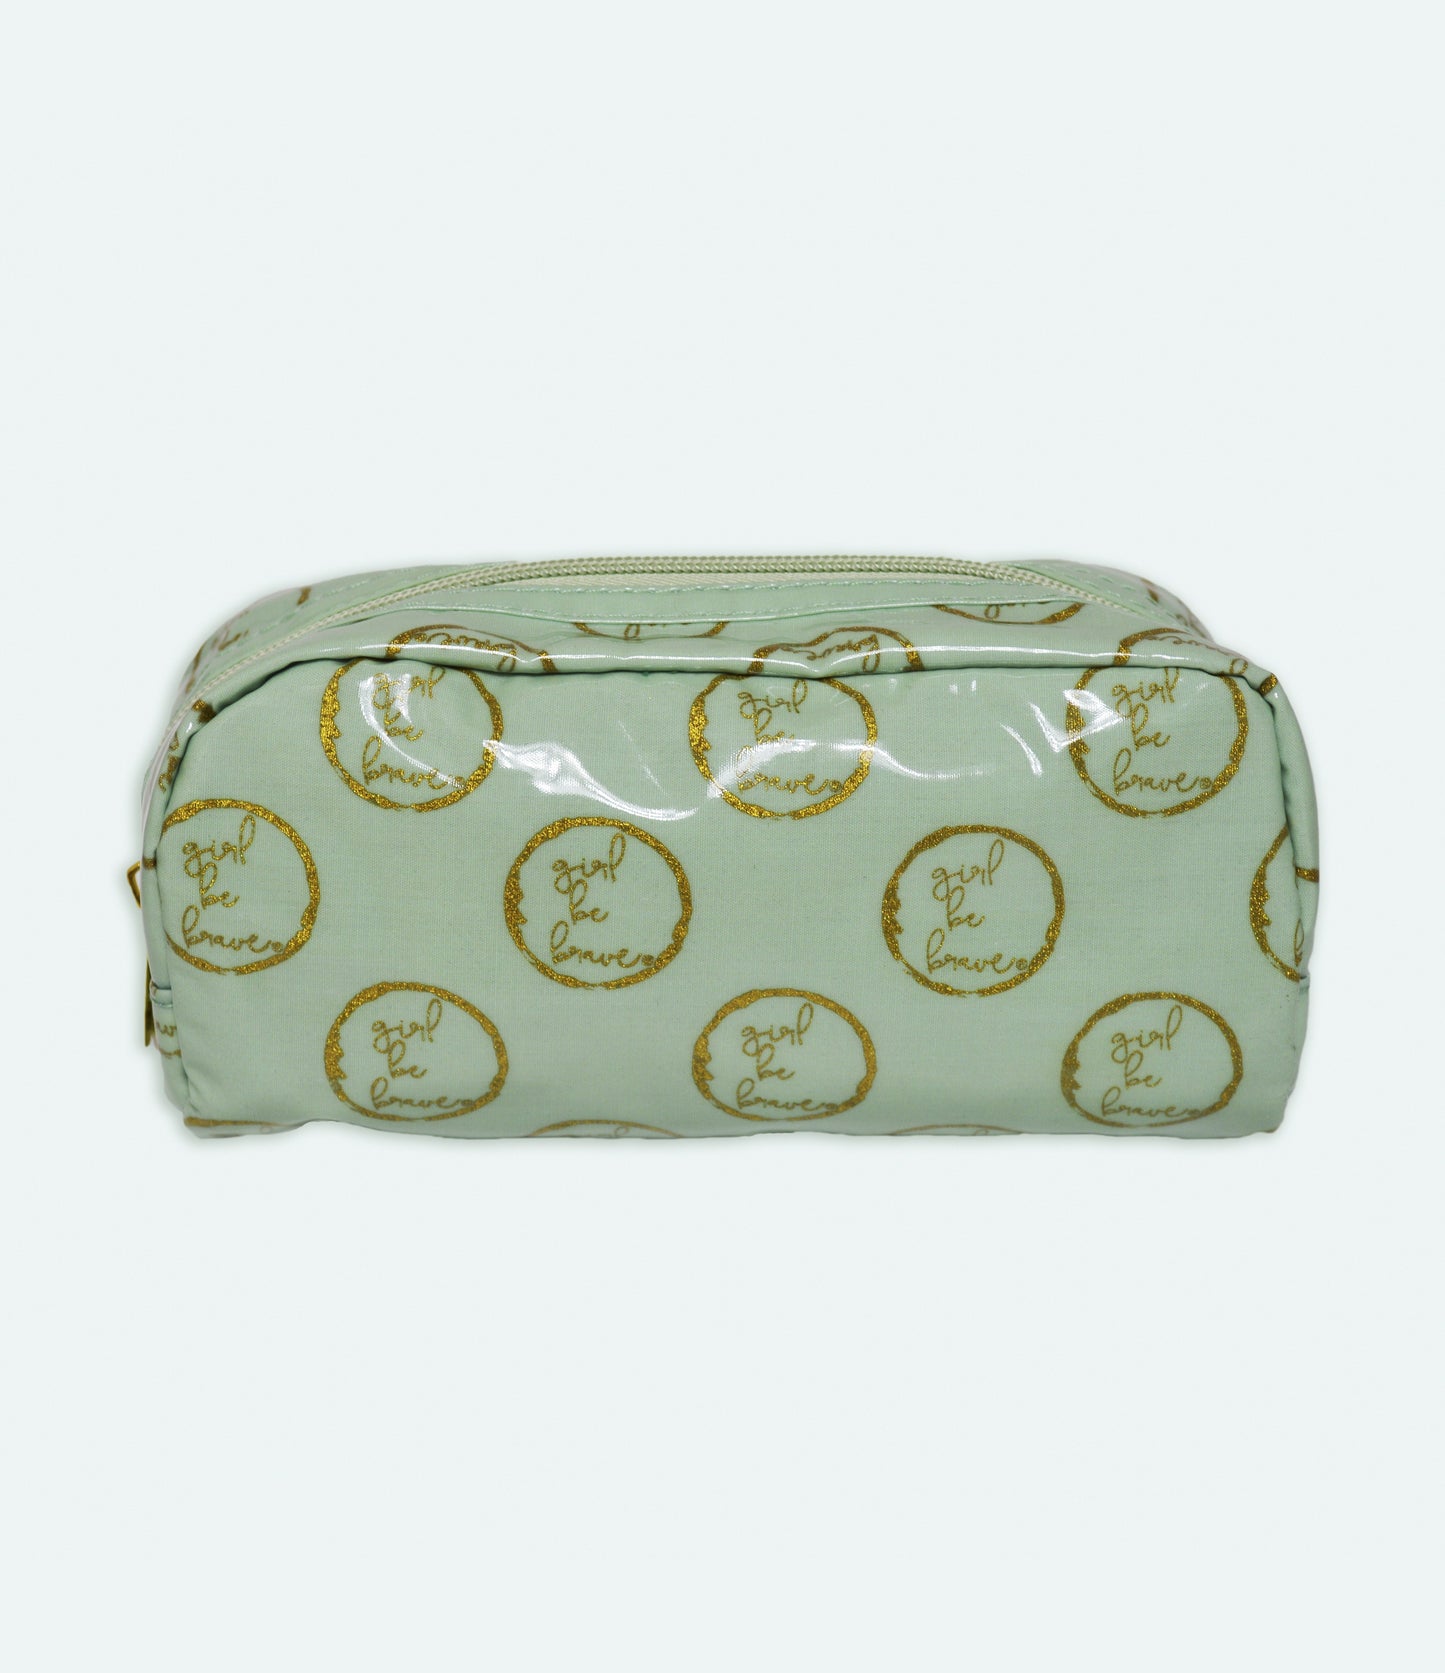 Girl Be Brave Cosmetic Bag